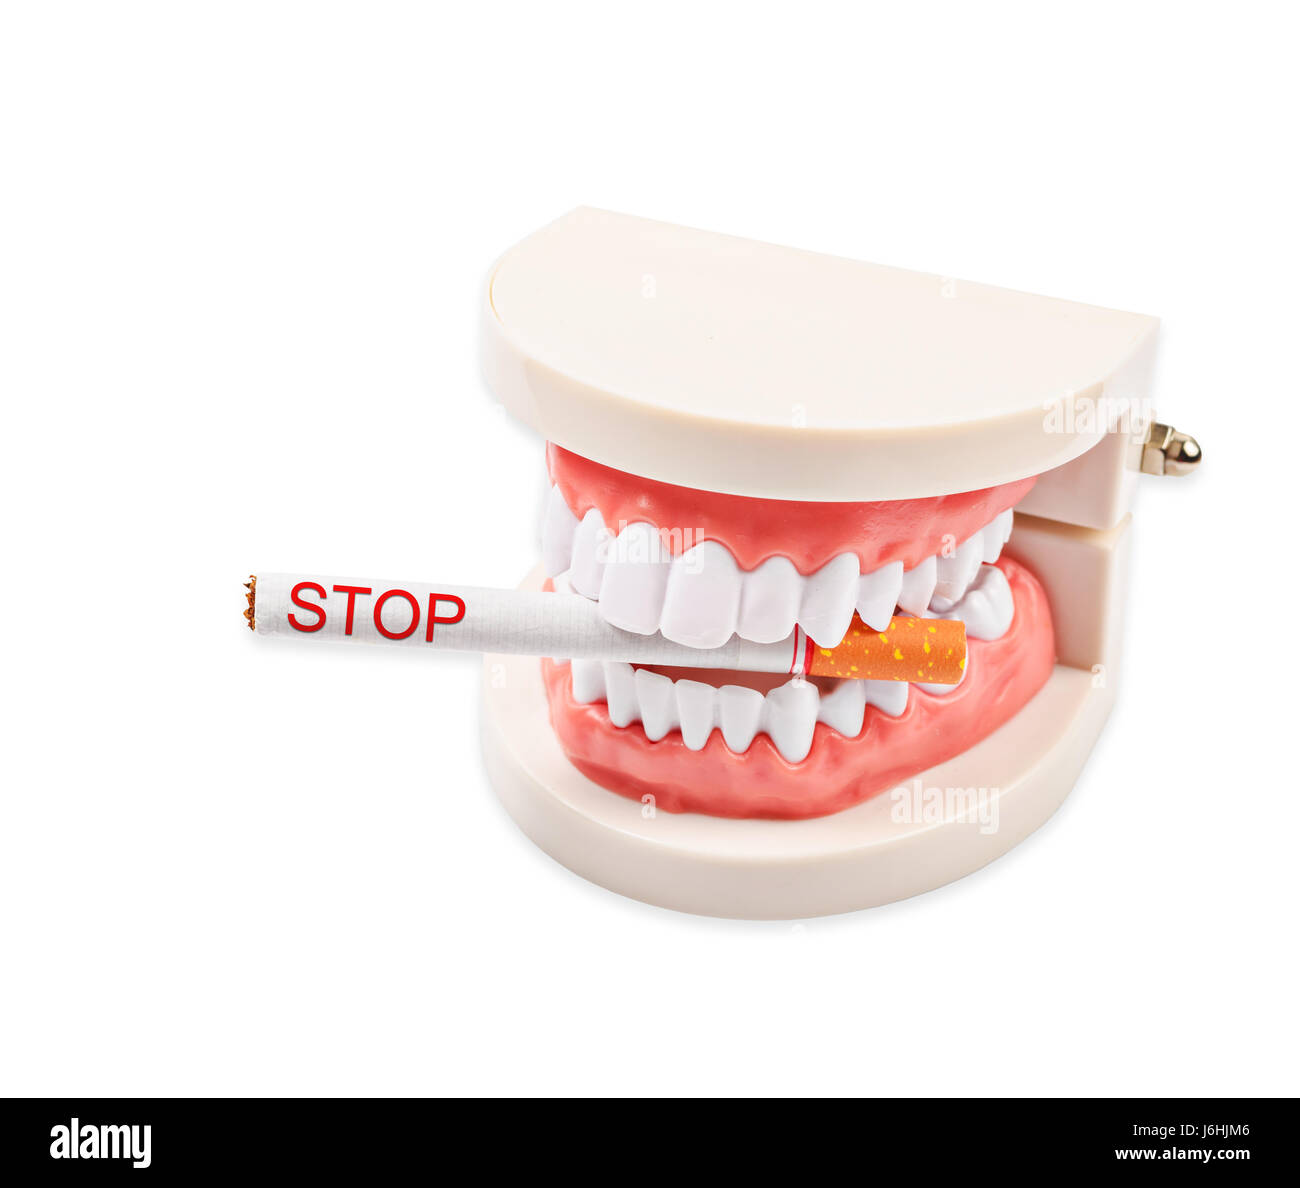 Tobacco with Stop word in dentist demonstration teeth model. isolated on white background, Save clipping path. Stock Photo